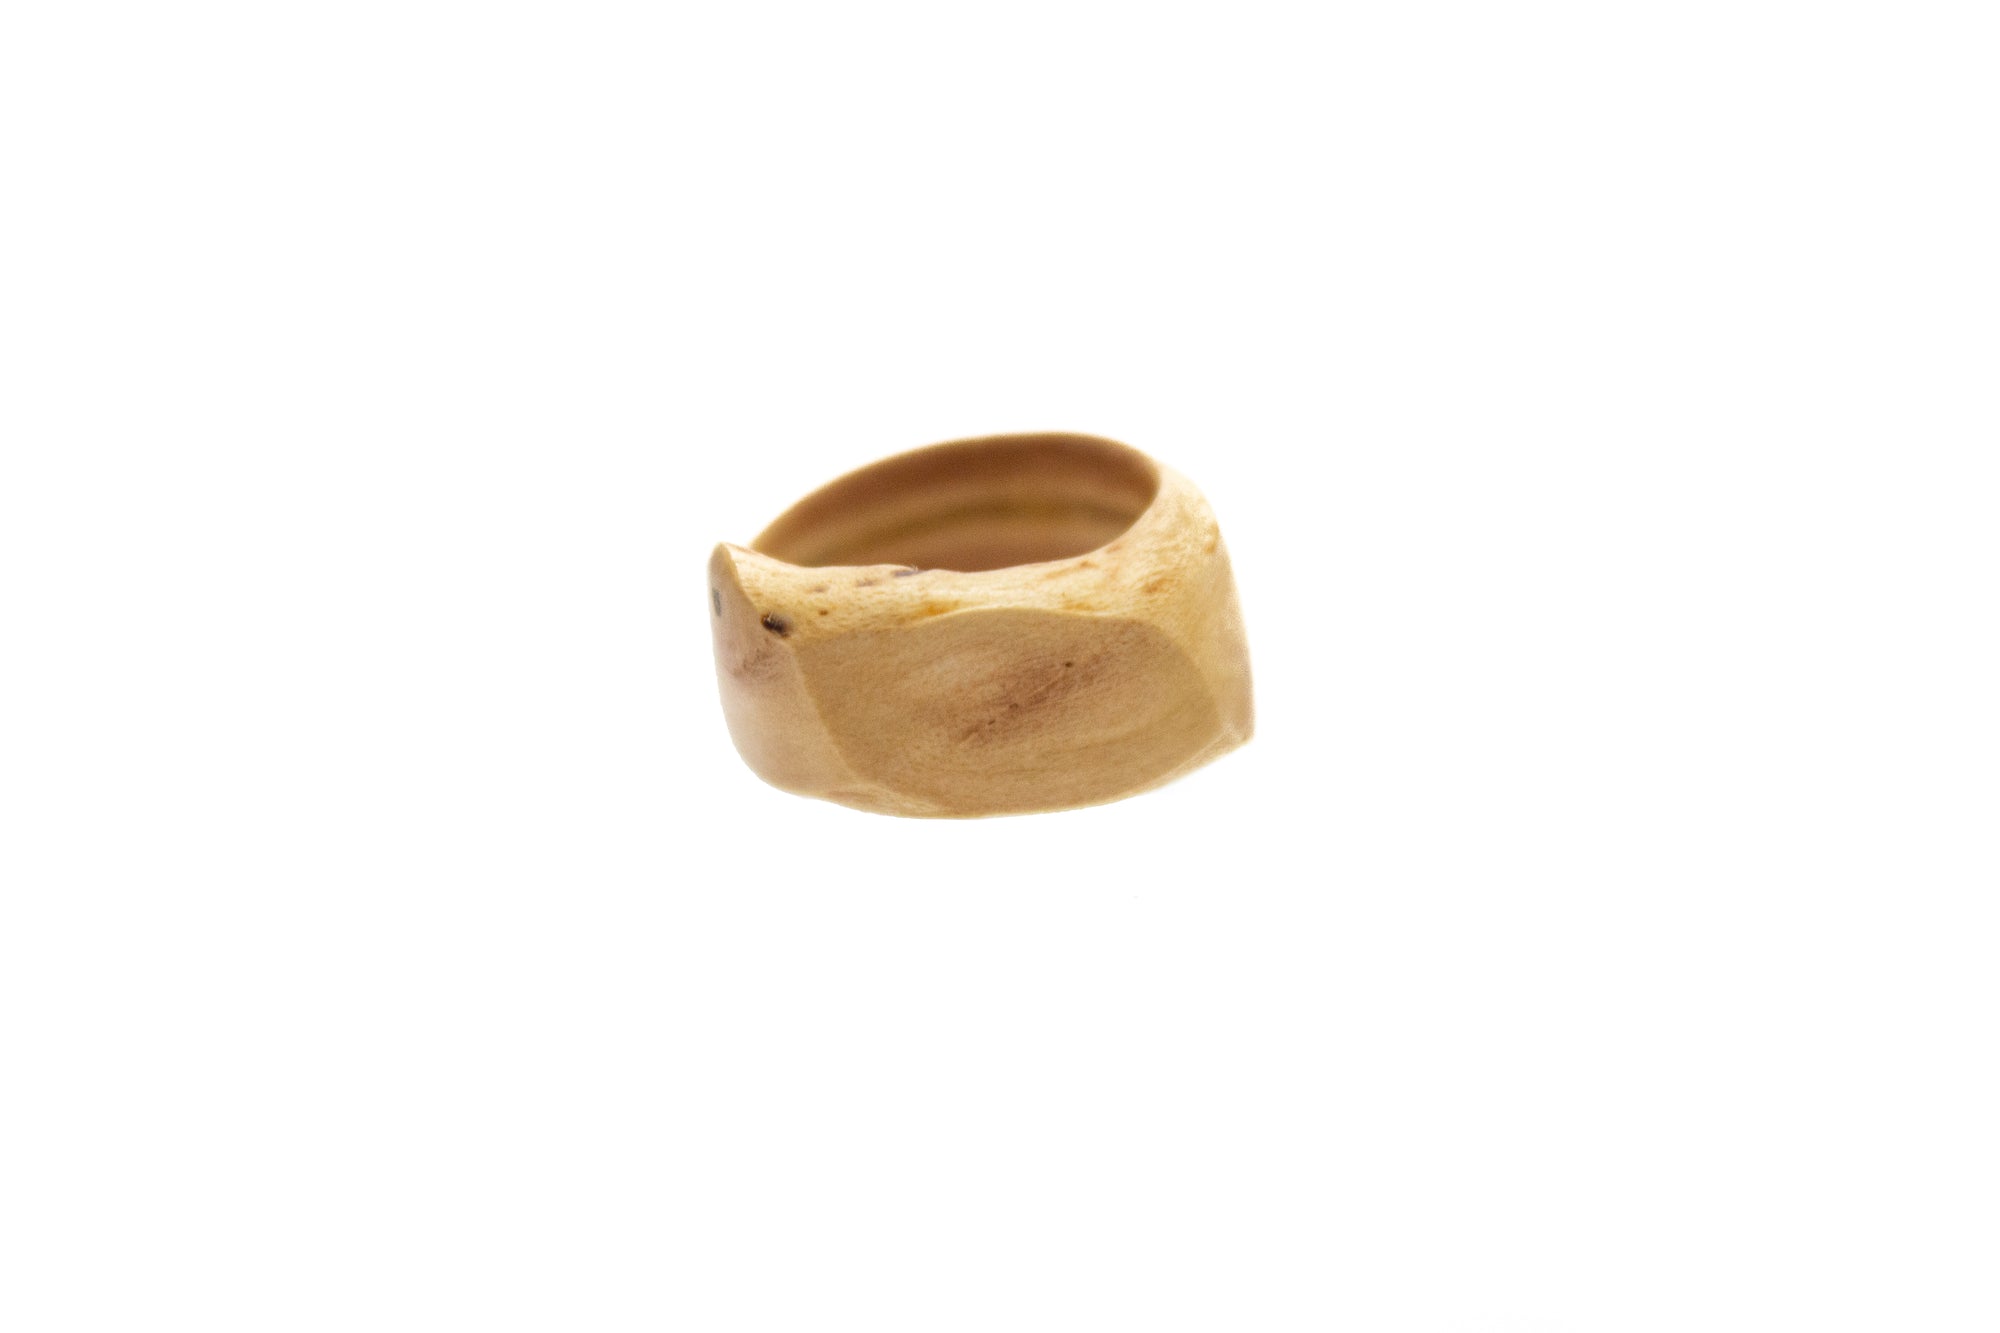 Green Wood Wizard Tree Ring-Size 5